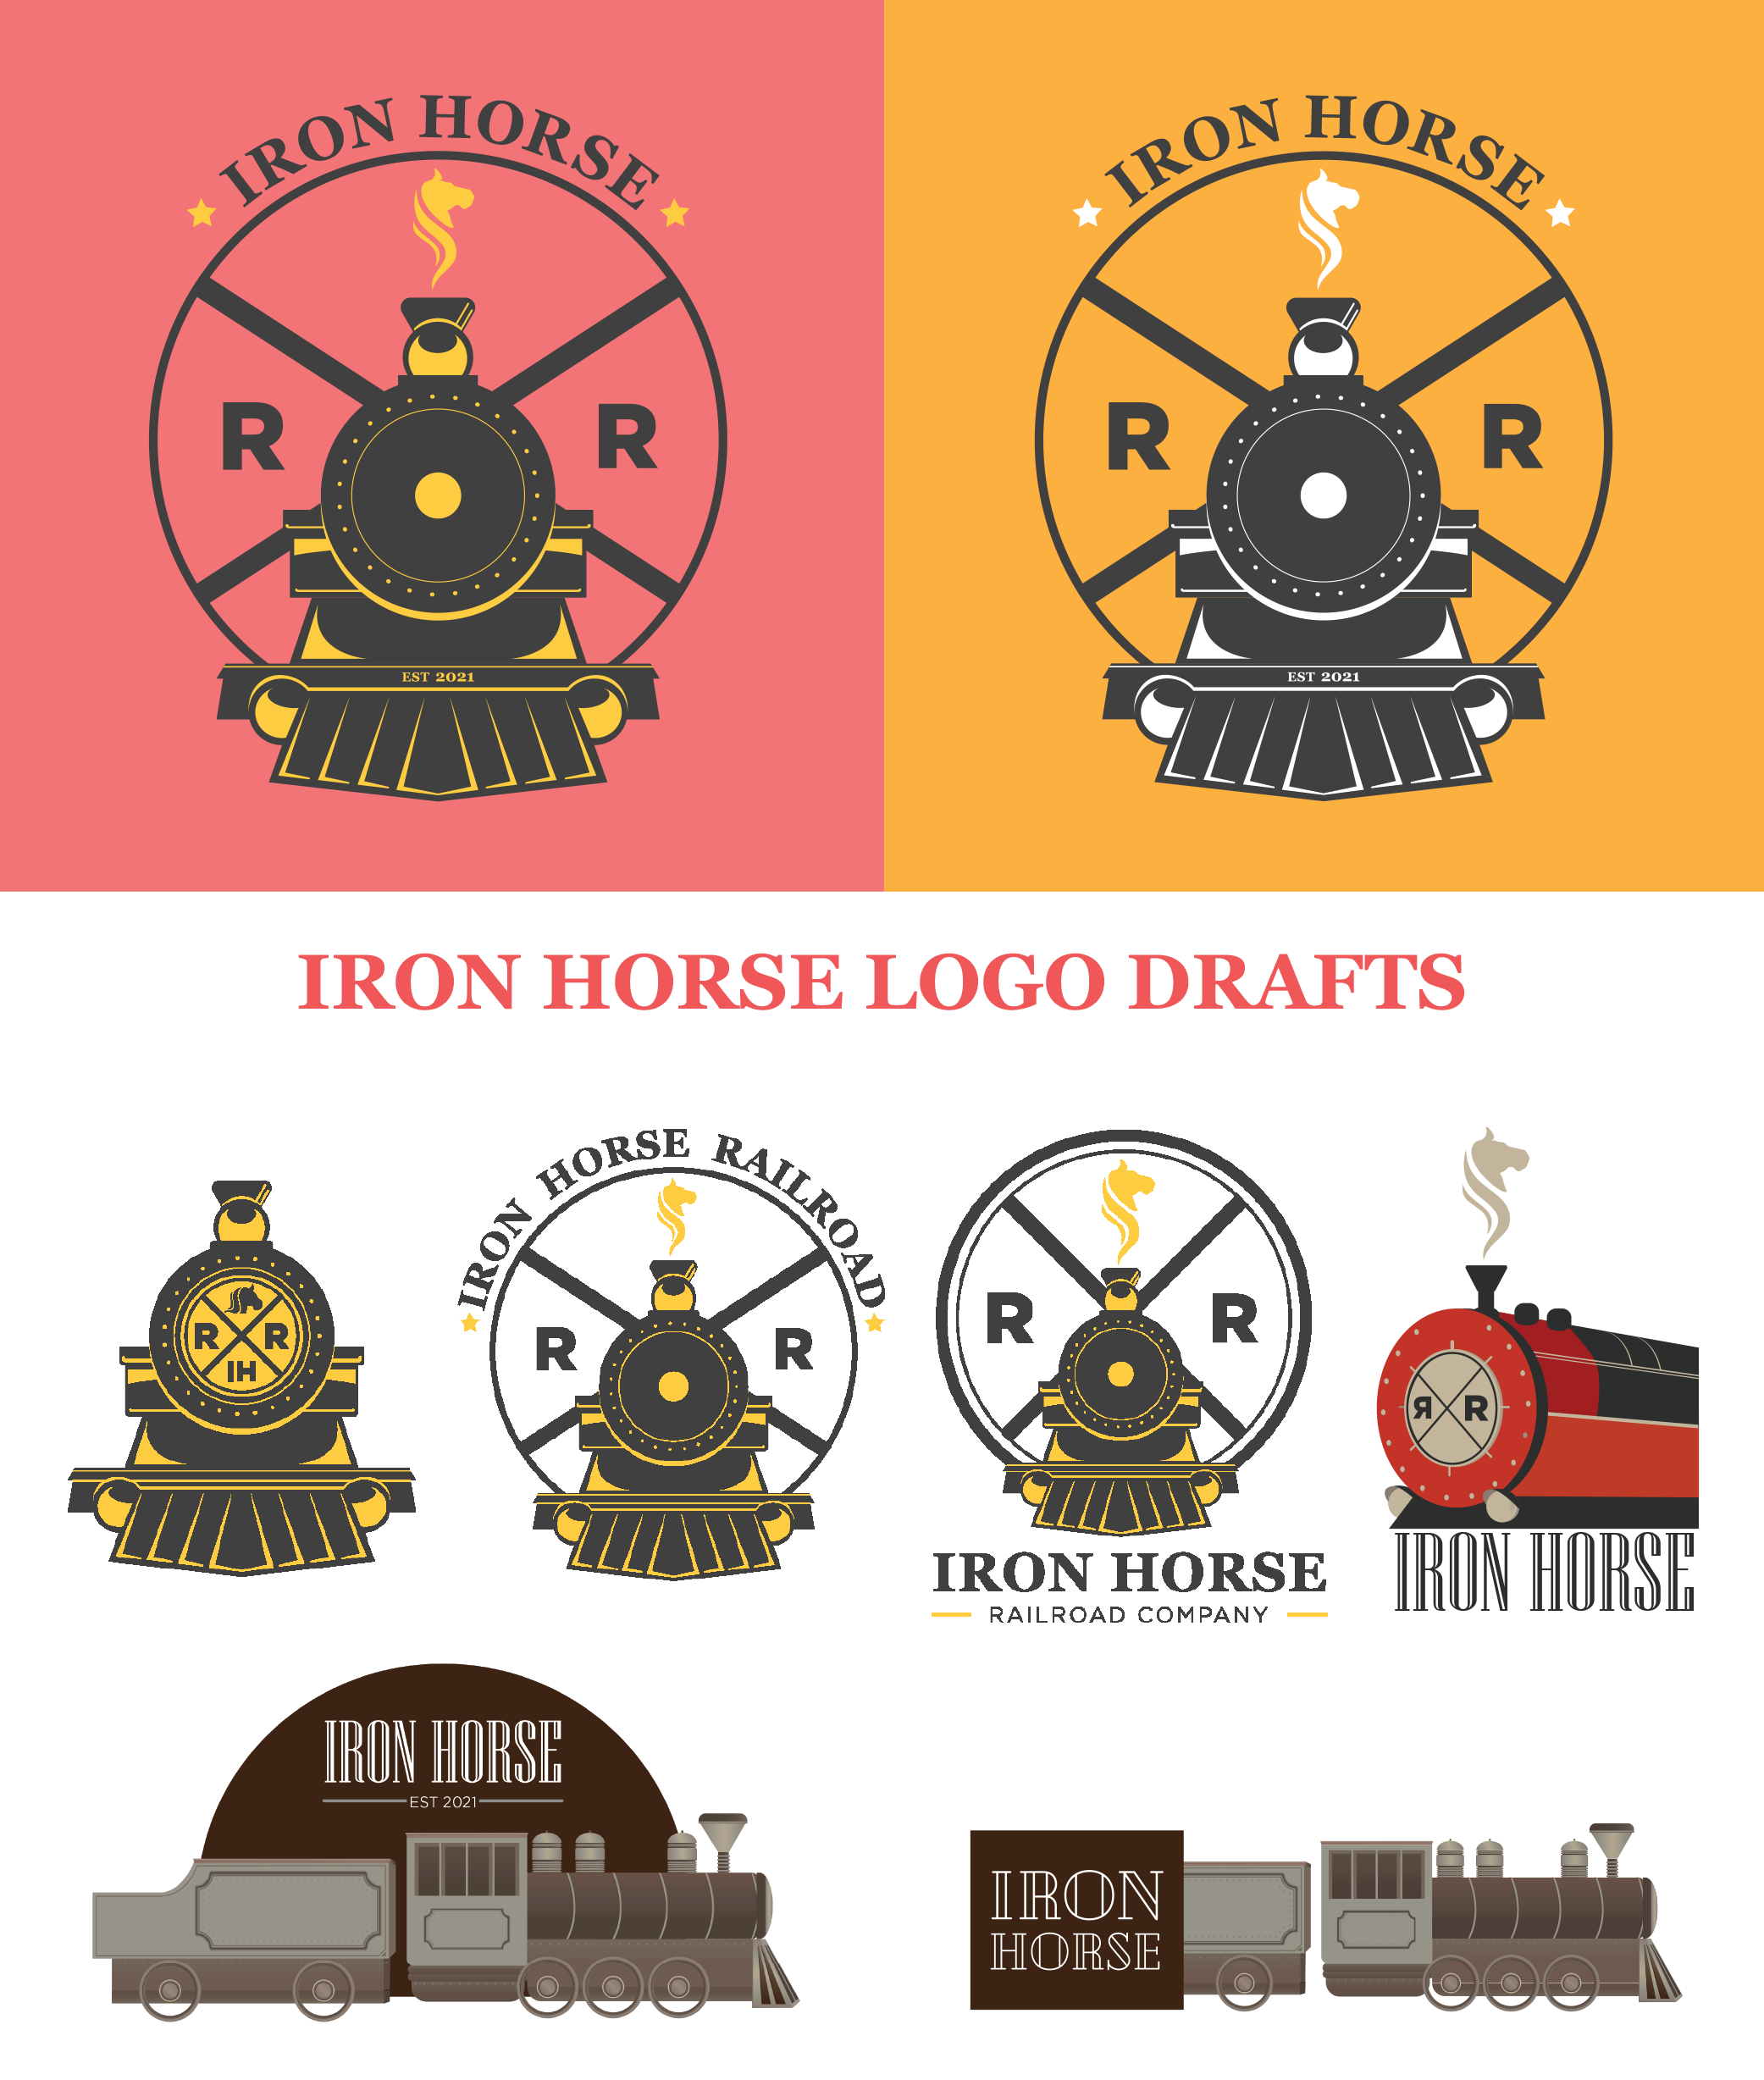 Iron Horse Railroad Case Study.png